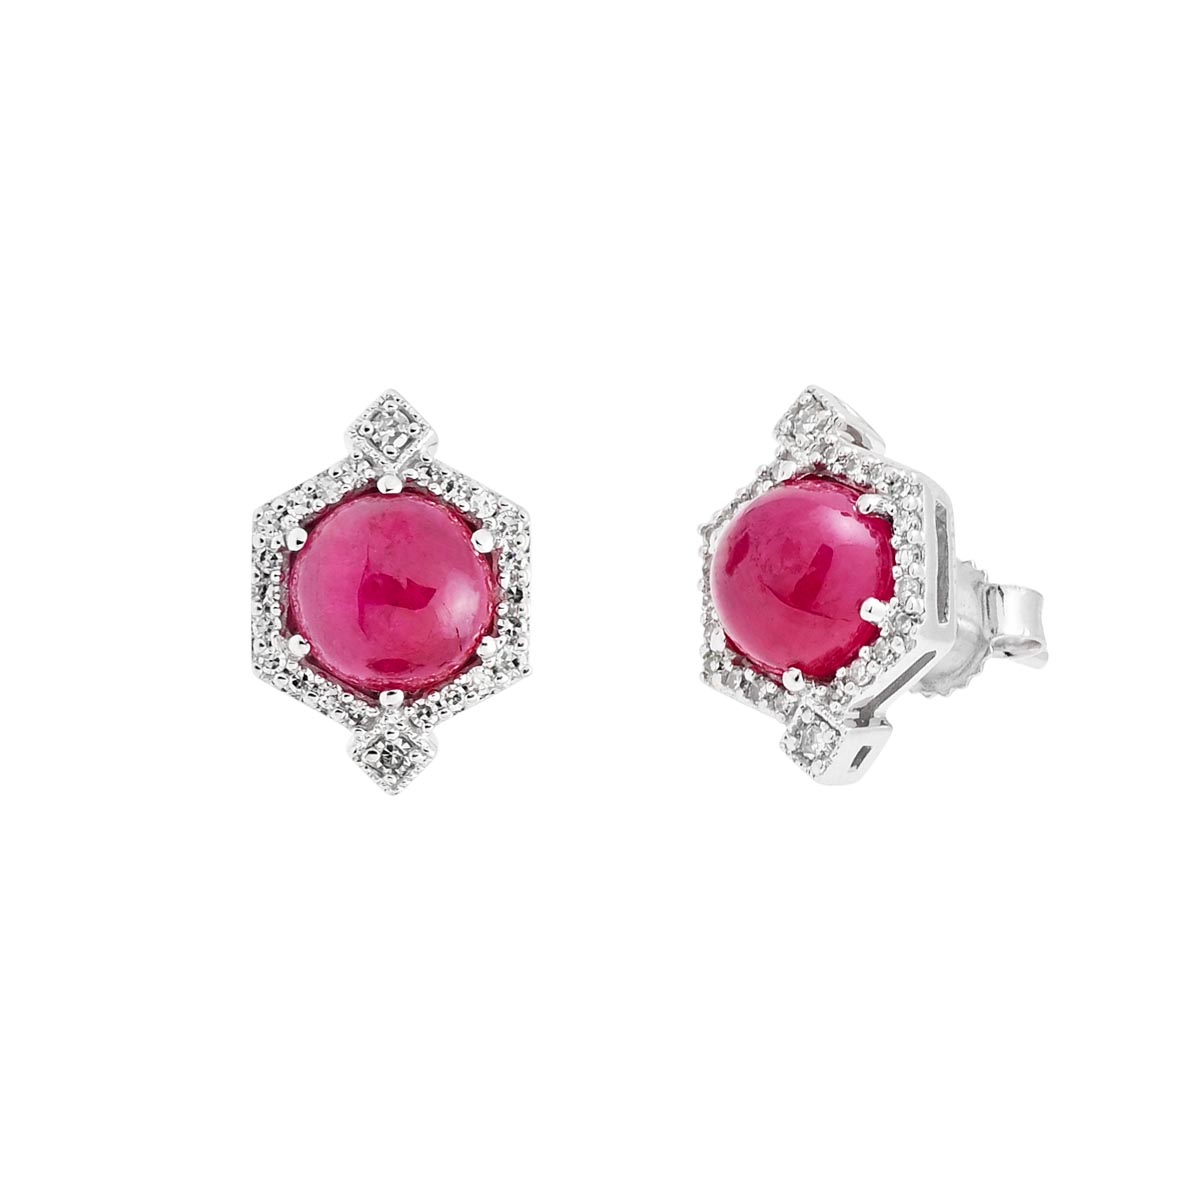 Greenland Ruby Stud Earrings in 10kt White Gold with Diamonds (1/7ct tw)